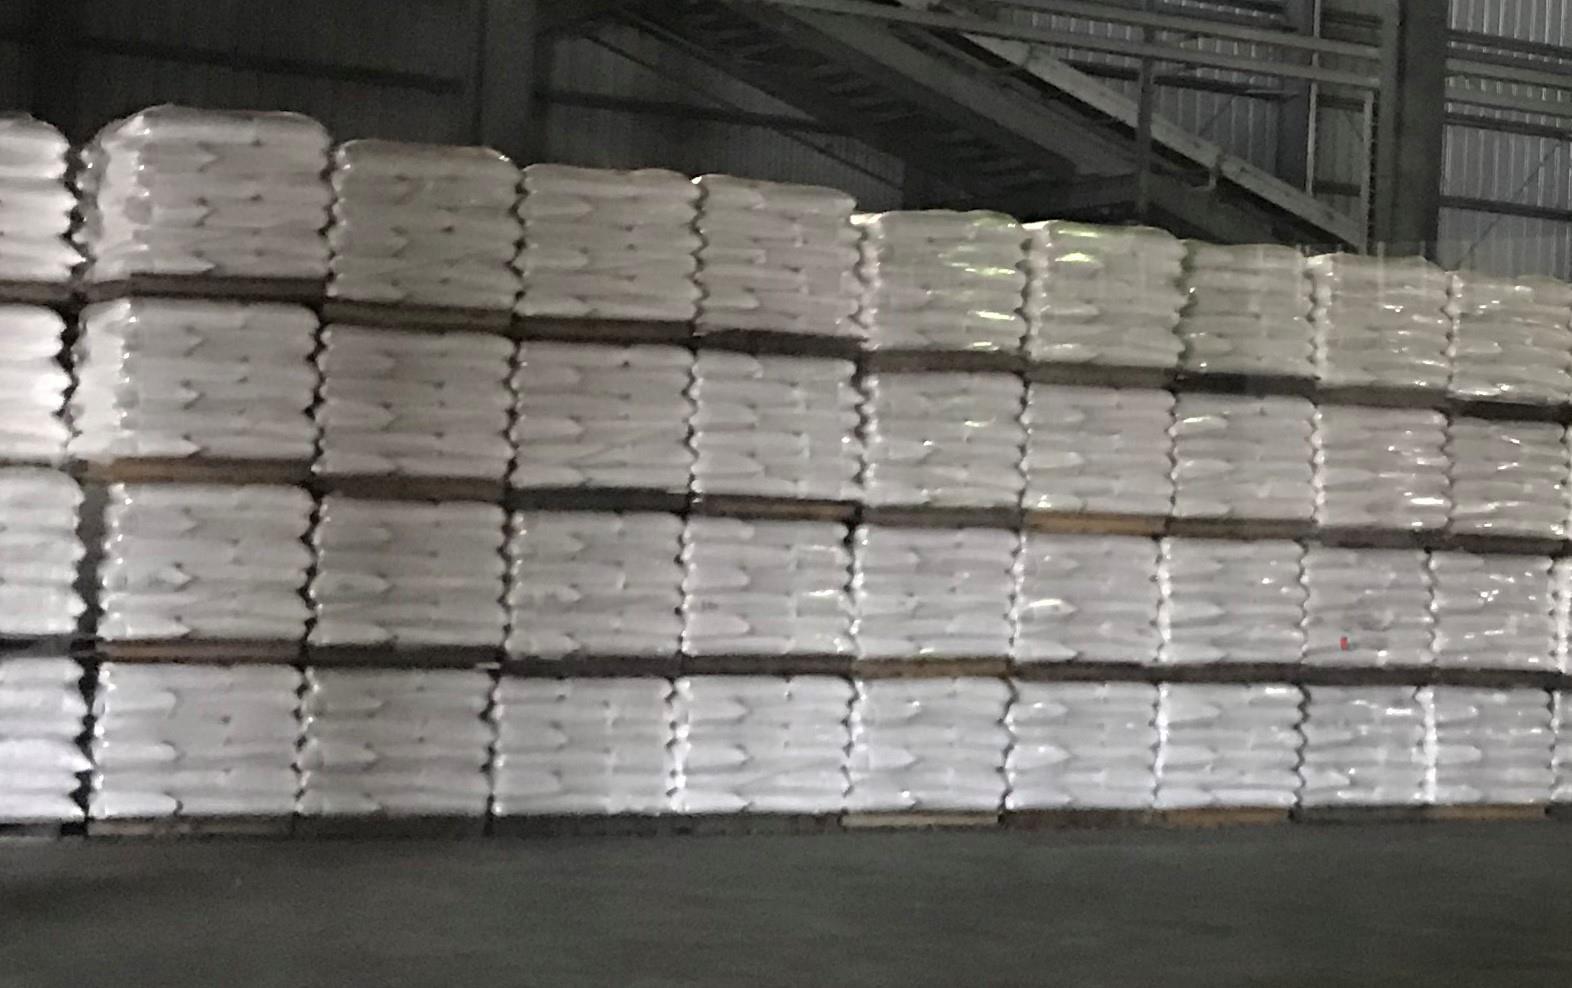 Warehouse full of bags of rice, stacked on pallets, ready to be shipped out